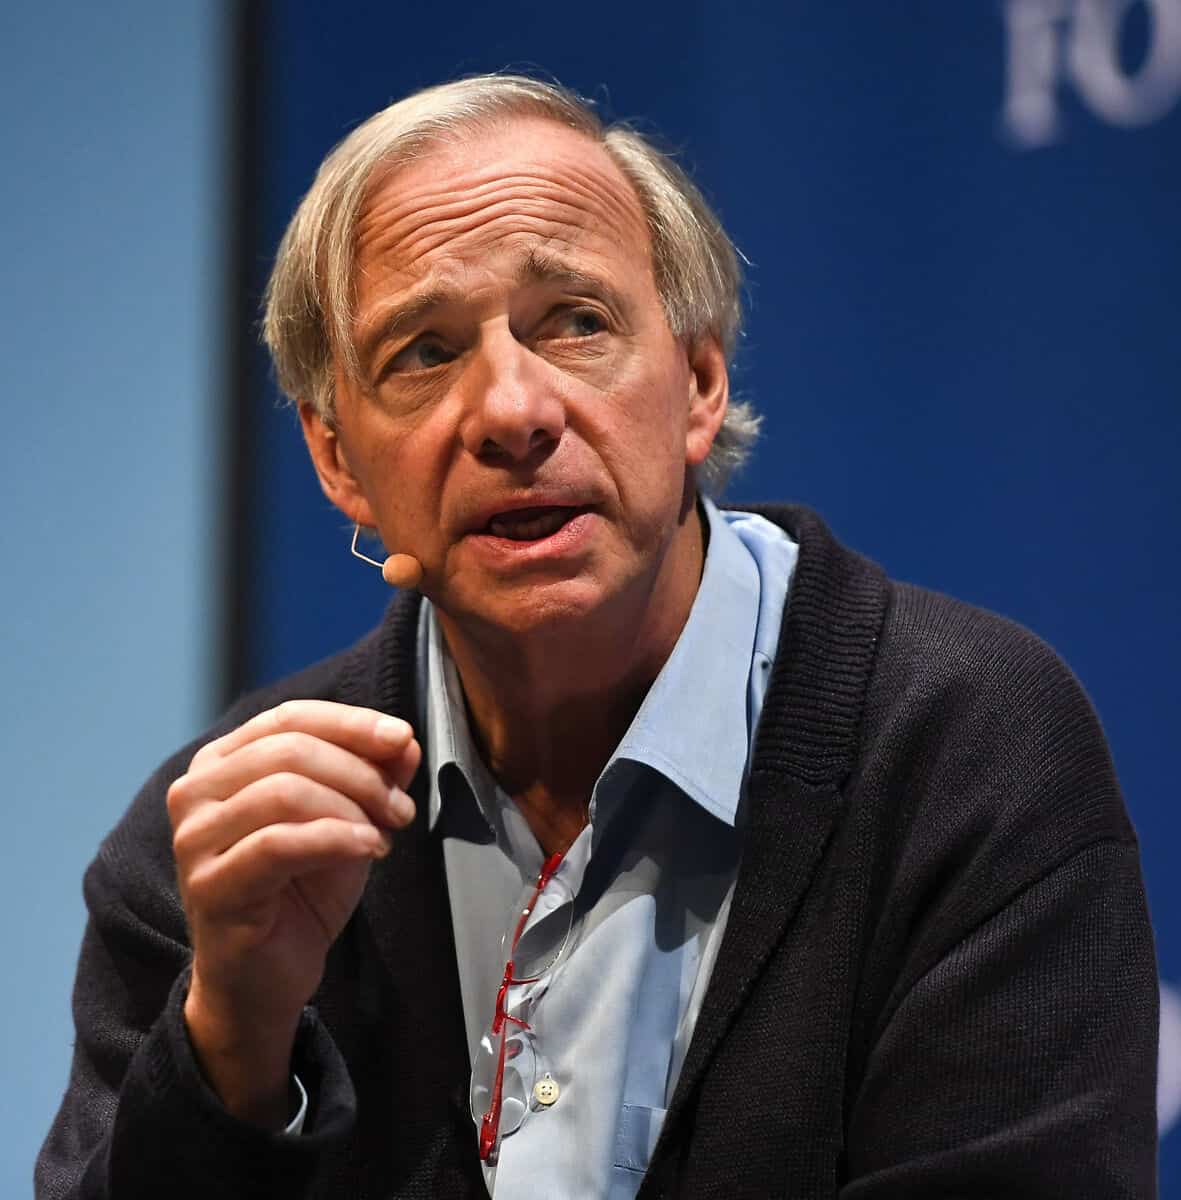 Ray Dalio Net Worth Details, Personal Info